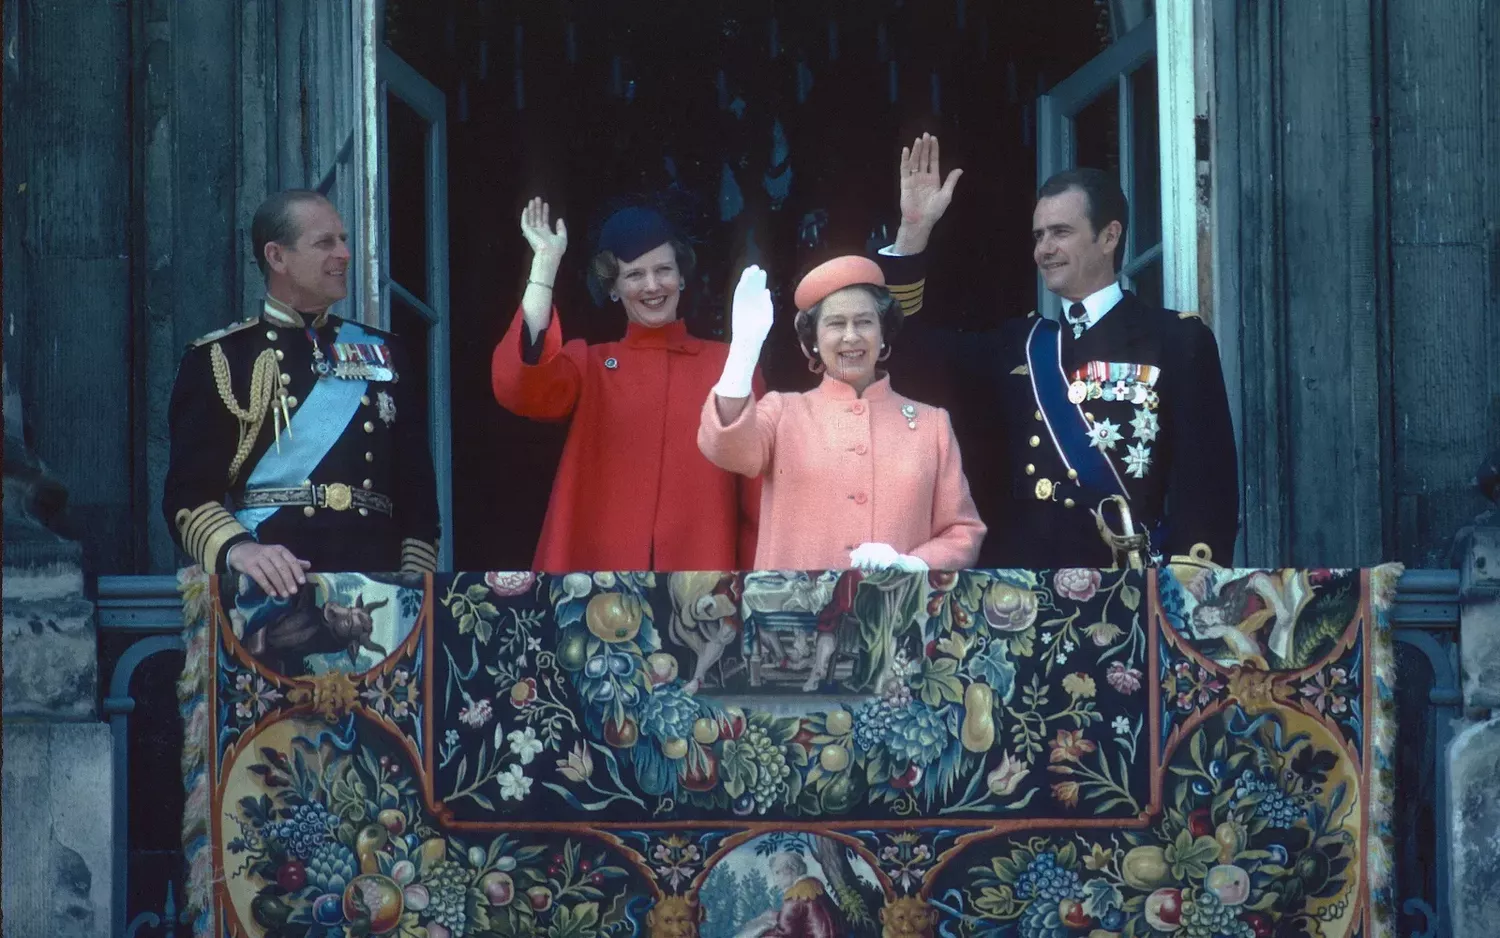 With Queen Elizabeth II of England and Prince Philip, Duke of Edinburgh, waving from the balcony in Copenhagen in May 1979.